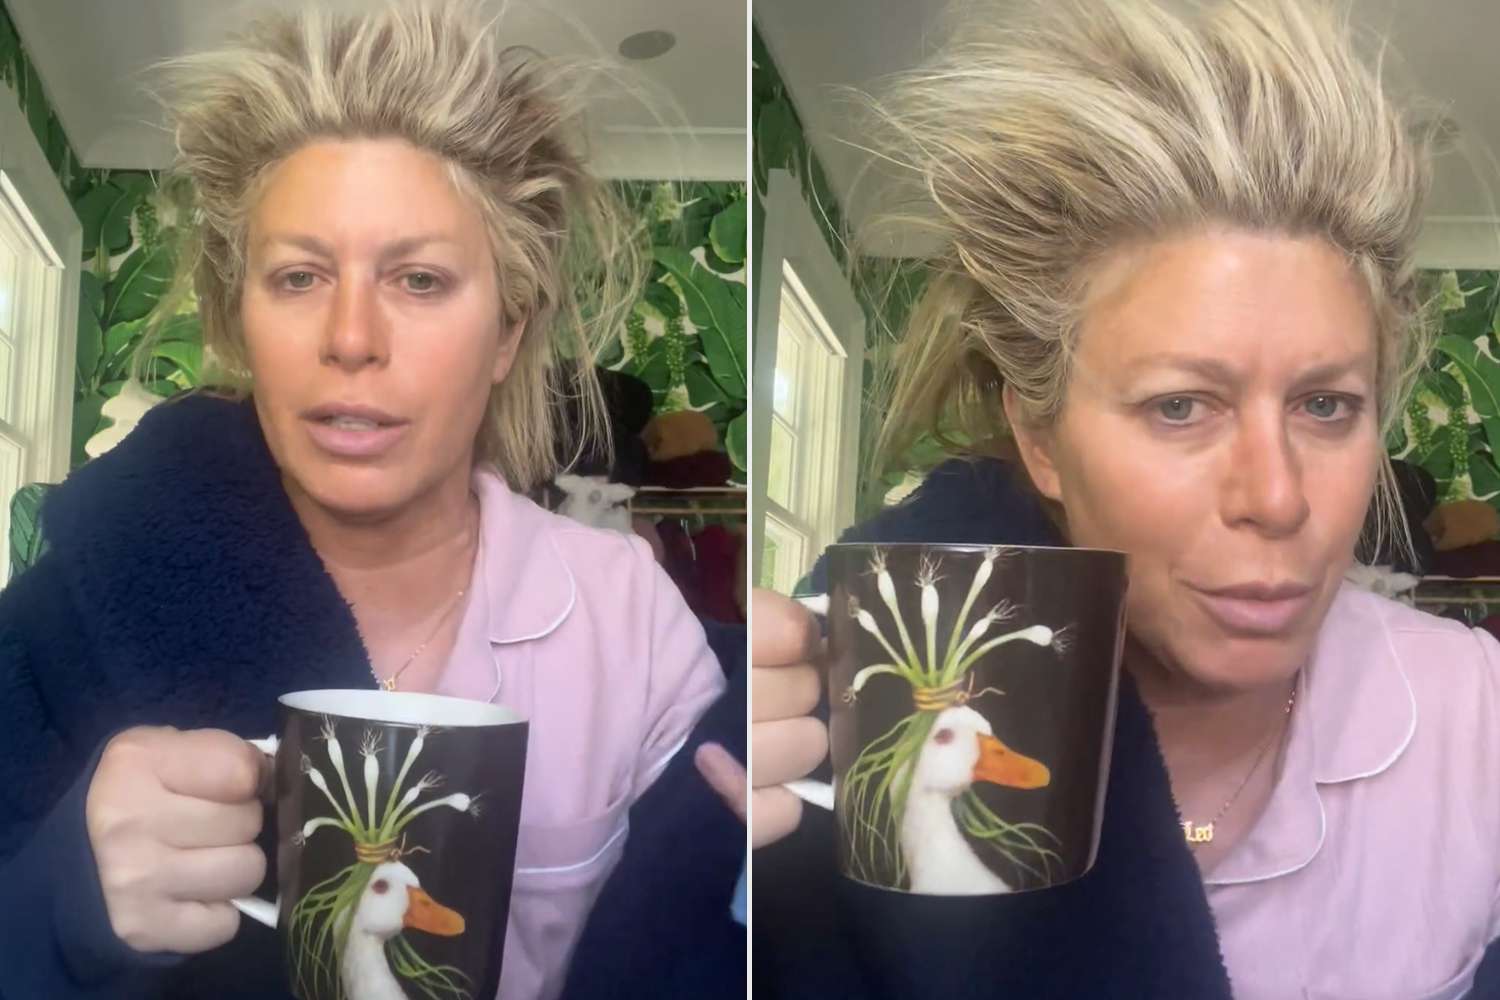 Jill Martin Pokes Fun at Her Hair 'Growing Up' After Chemotherapy, Jokes That She Looks Like a Duck